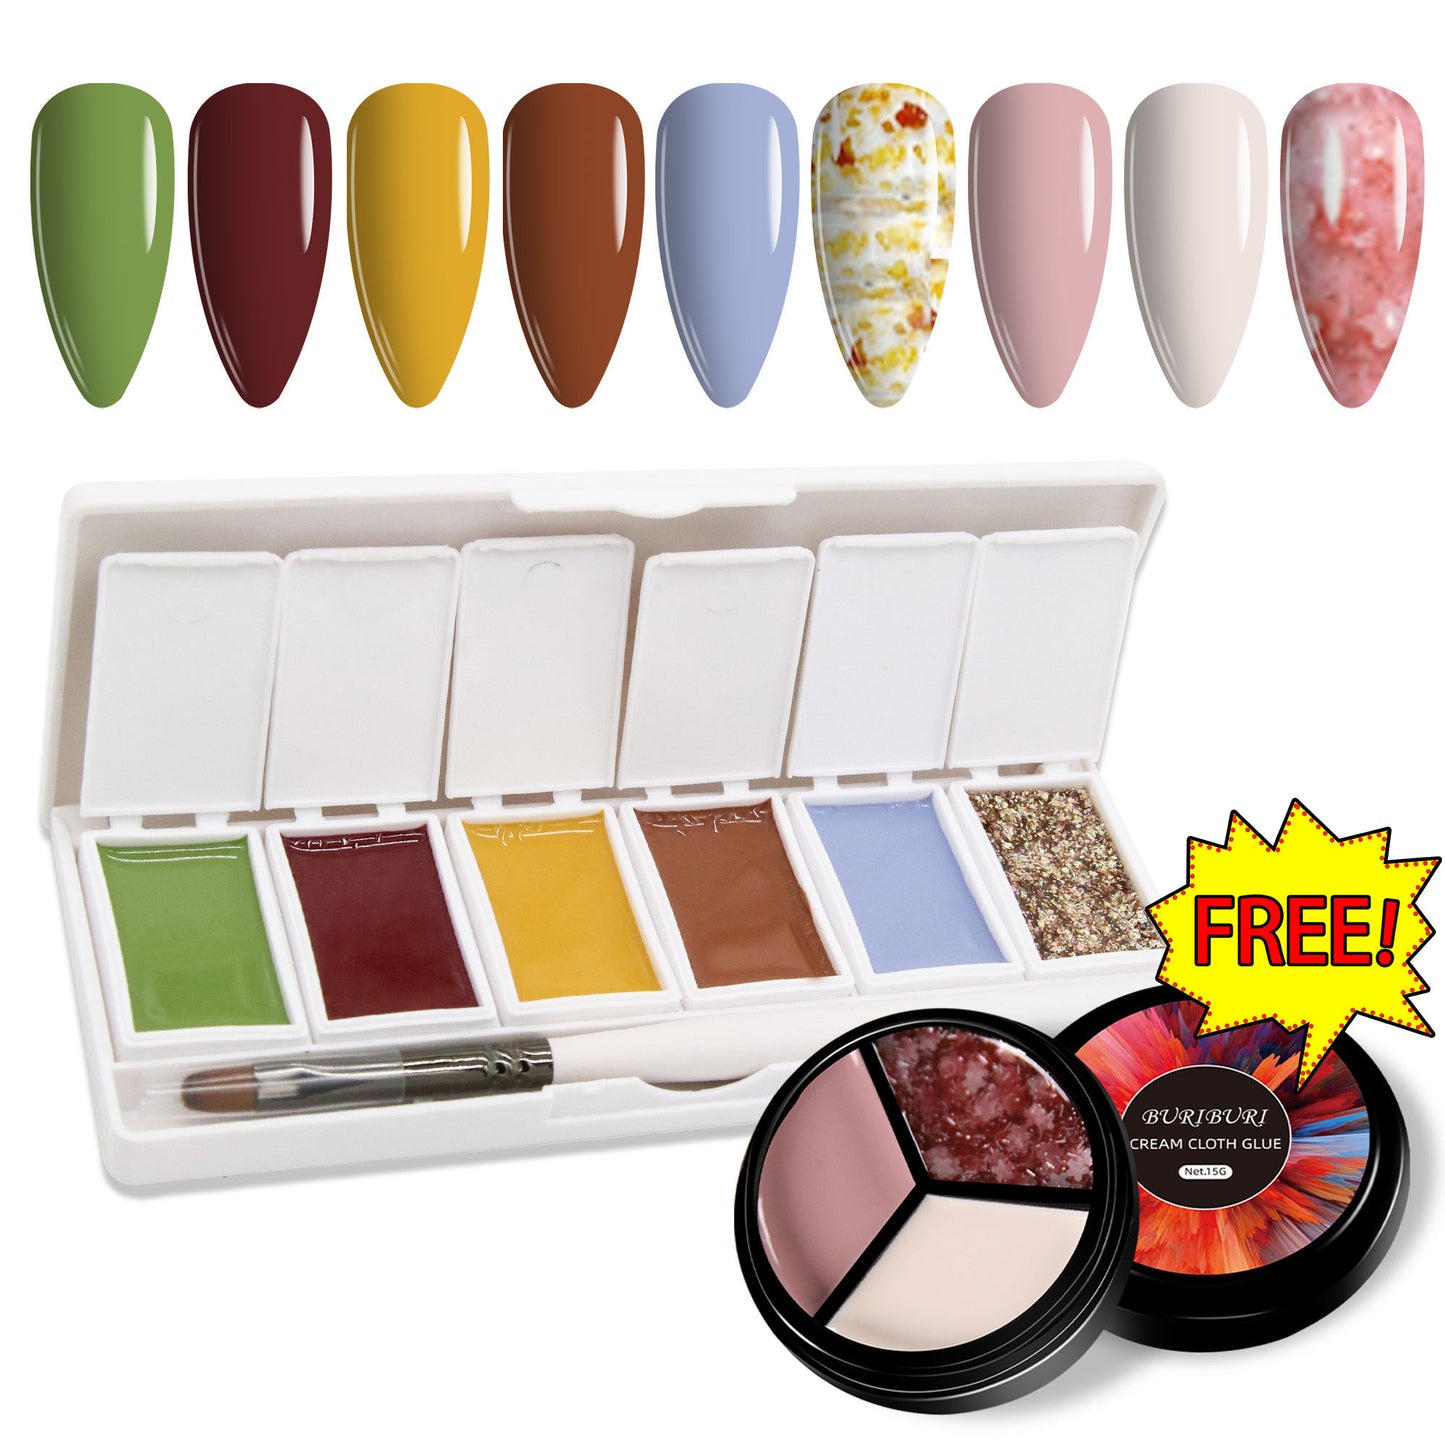 Oil Painting Barley 6-colors-in-1 + Free 3-colors-in-1 (#24) Solid Cream Gel Polish